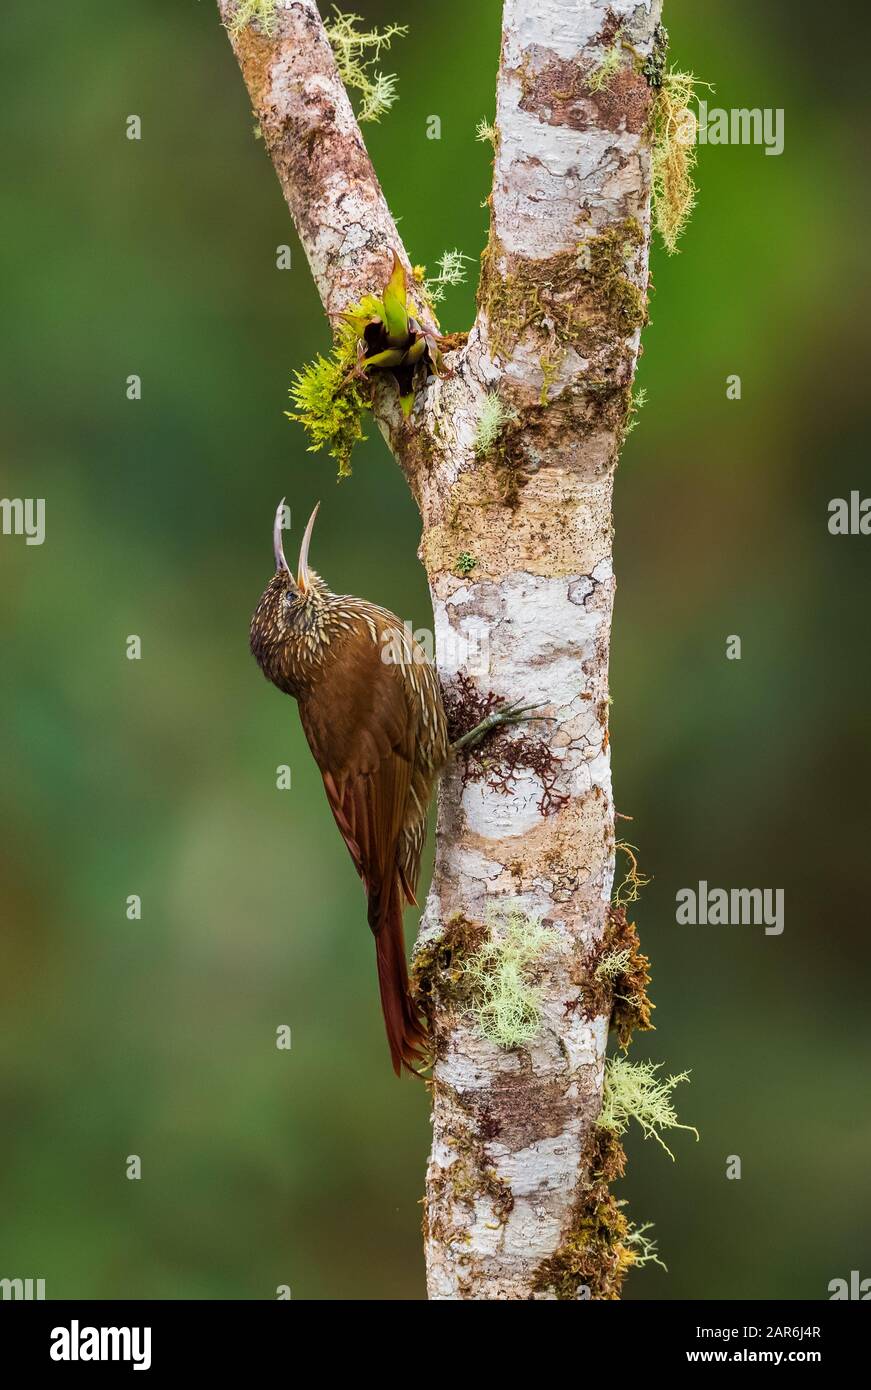 Montane Woodcreeper - Lepidocolaptes lacrymiger, cute woodcreeper from Andean slopes of South America, San Isidro lodge, Ecuador. Stock Photo